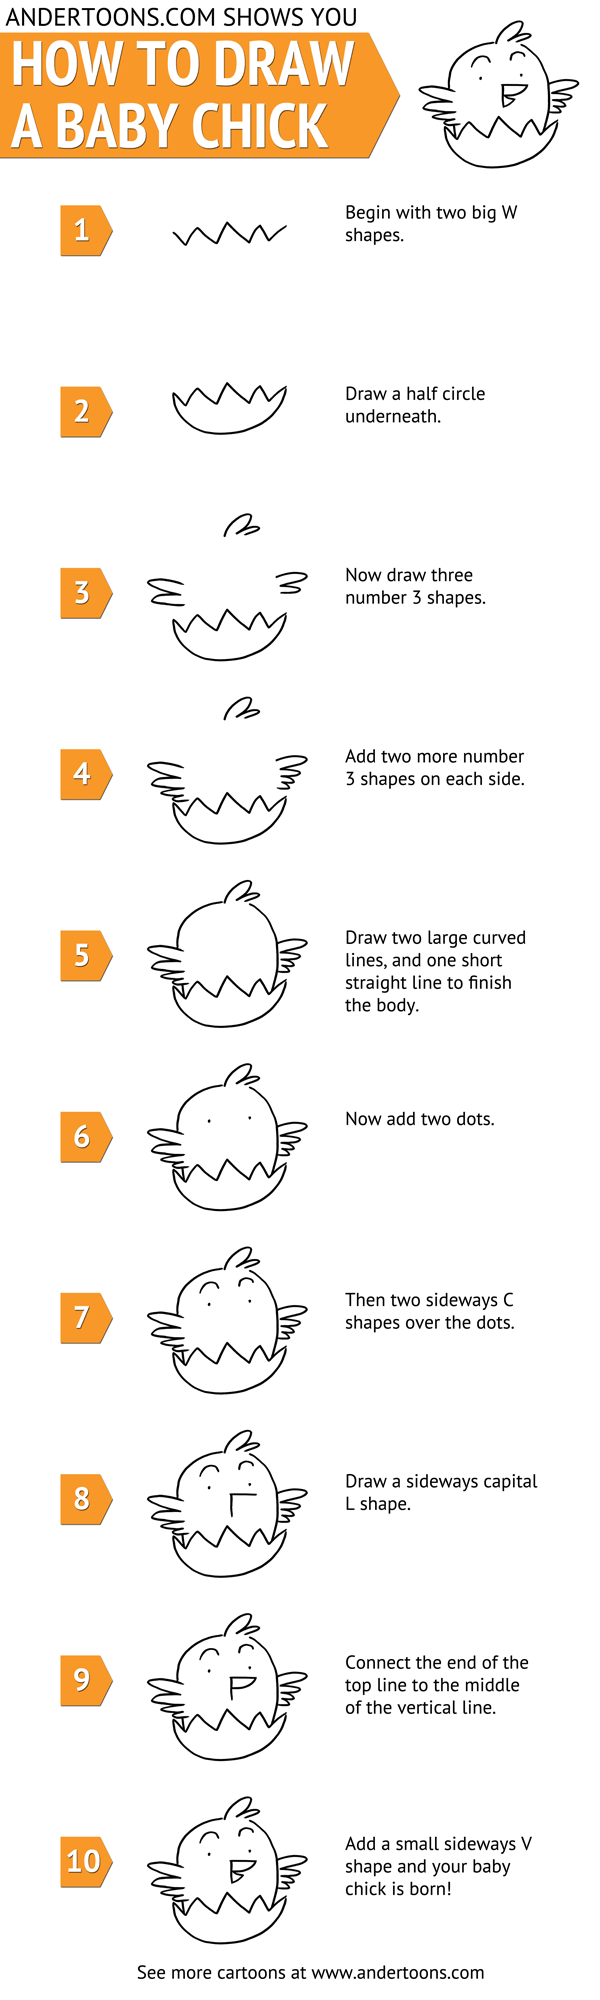 How to draw a cartoon baby chick step-by-step